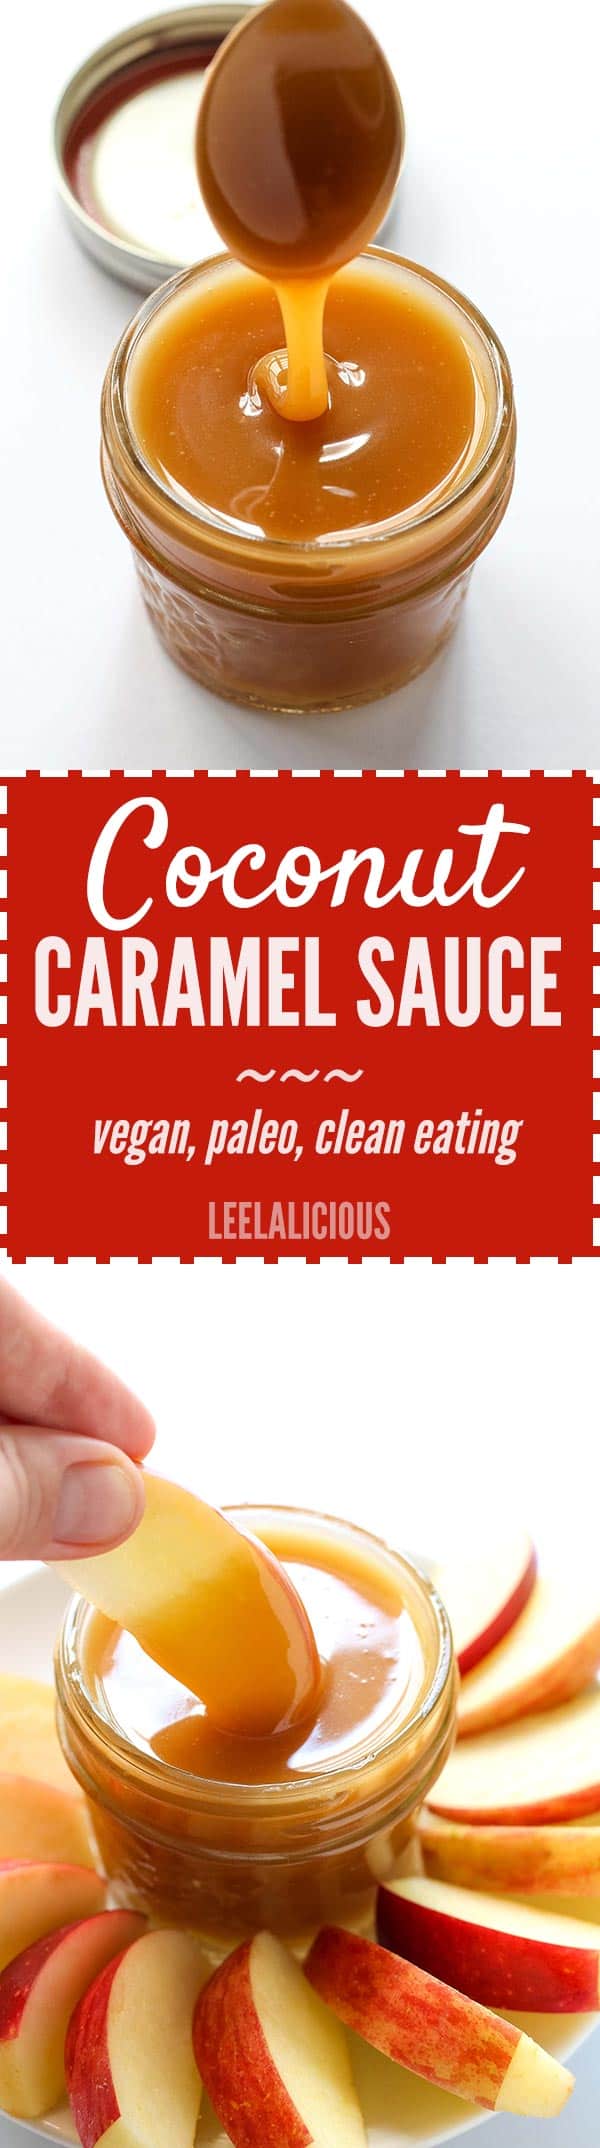 Learn how to make delicious Vegan Caramel Sauce with coconut milk. This awesome recipe is not only dairy free but also uses no refined sugar so it is clean eating and paleo friendly.